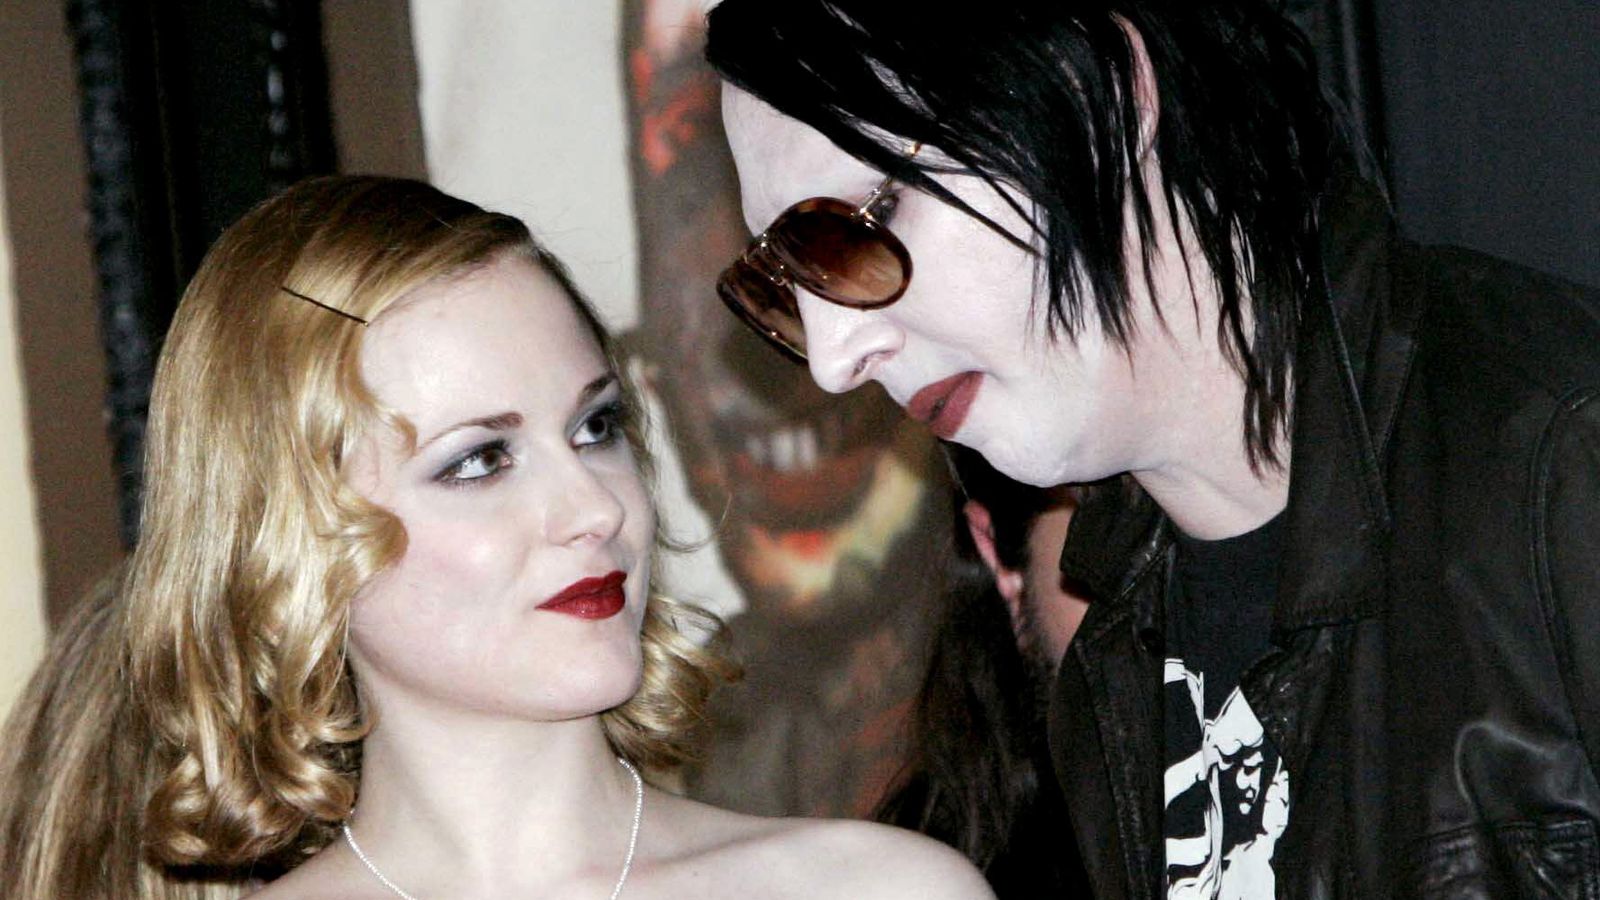 Evan Rachel Wood Accuses Marilyn Manson Of Years Of Horrific Abuse After Grooming As A Teenager Ents Arts News Sky News